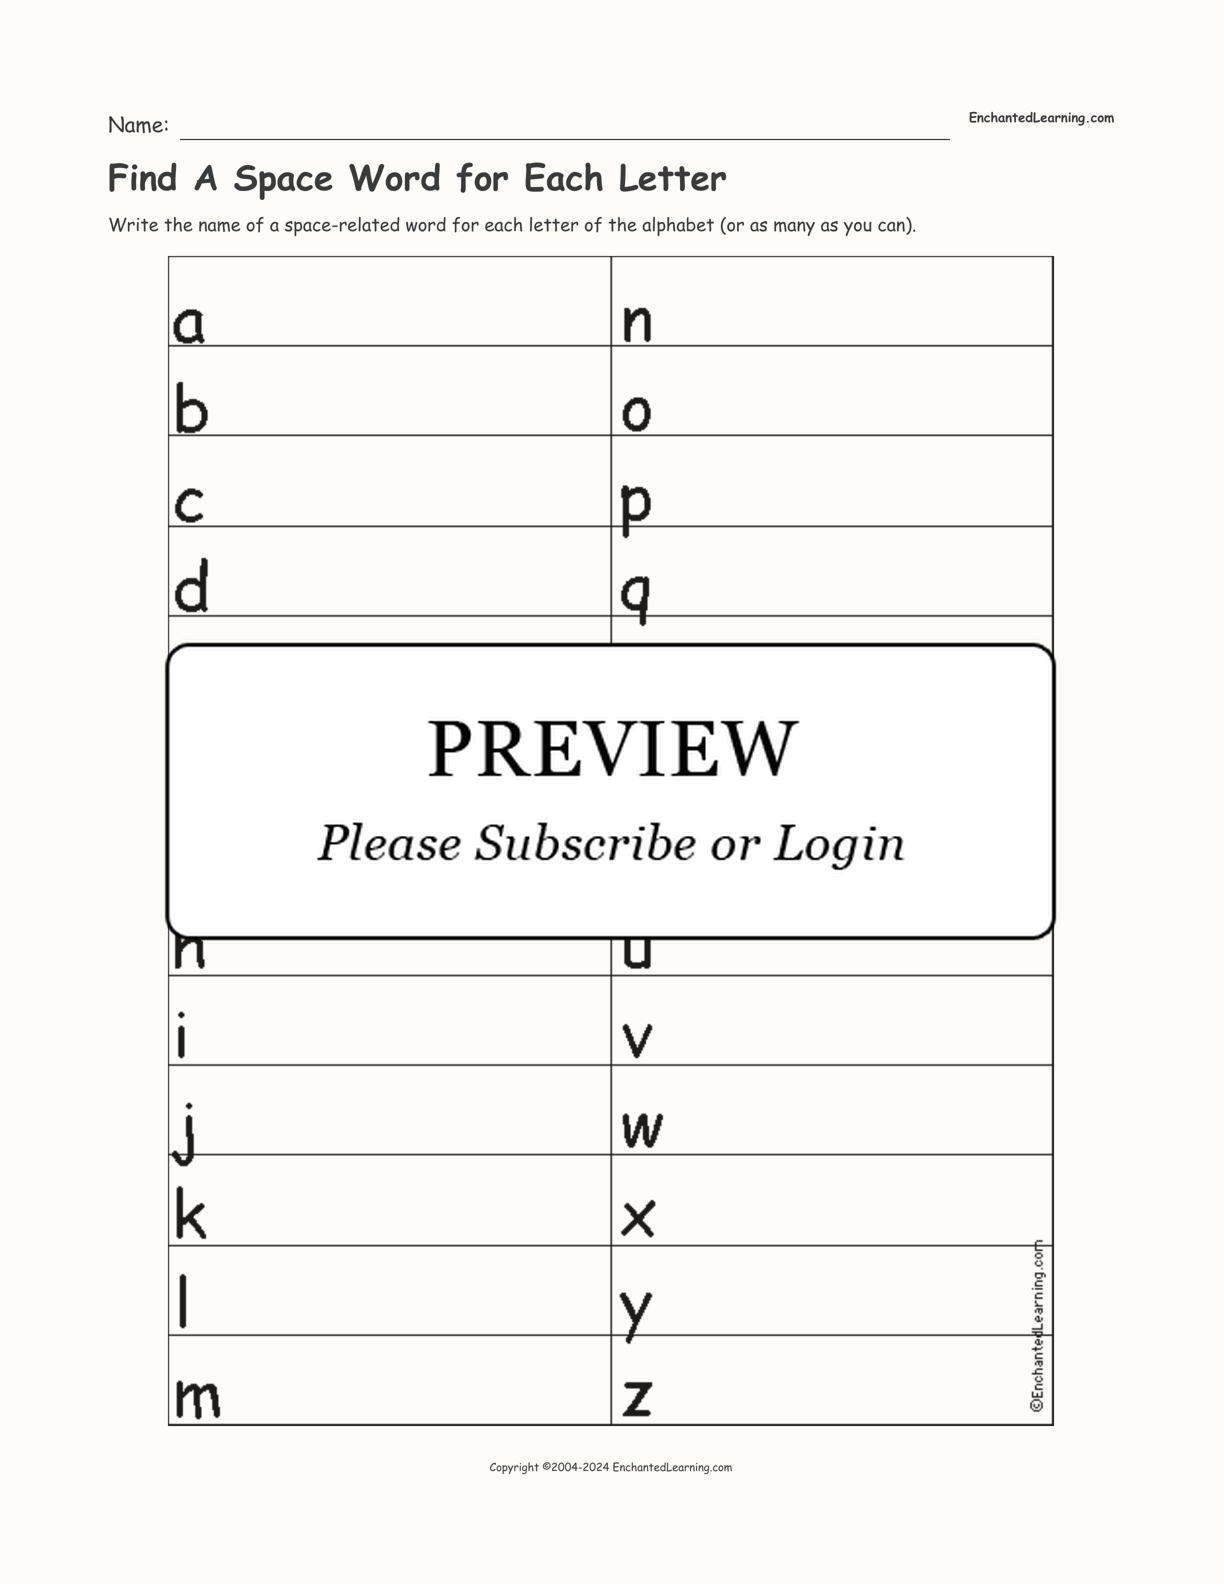 Find A Space Word for Each Letter interactive worksheet page 1